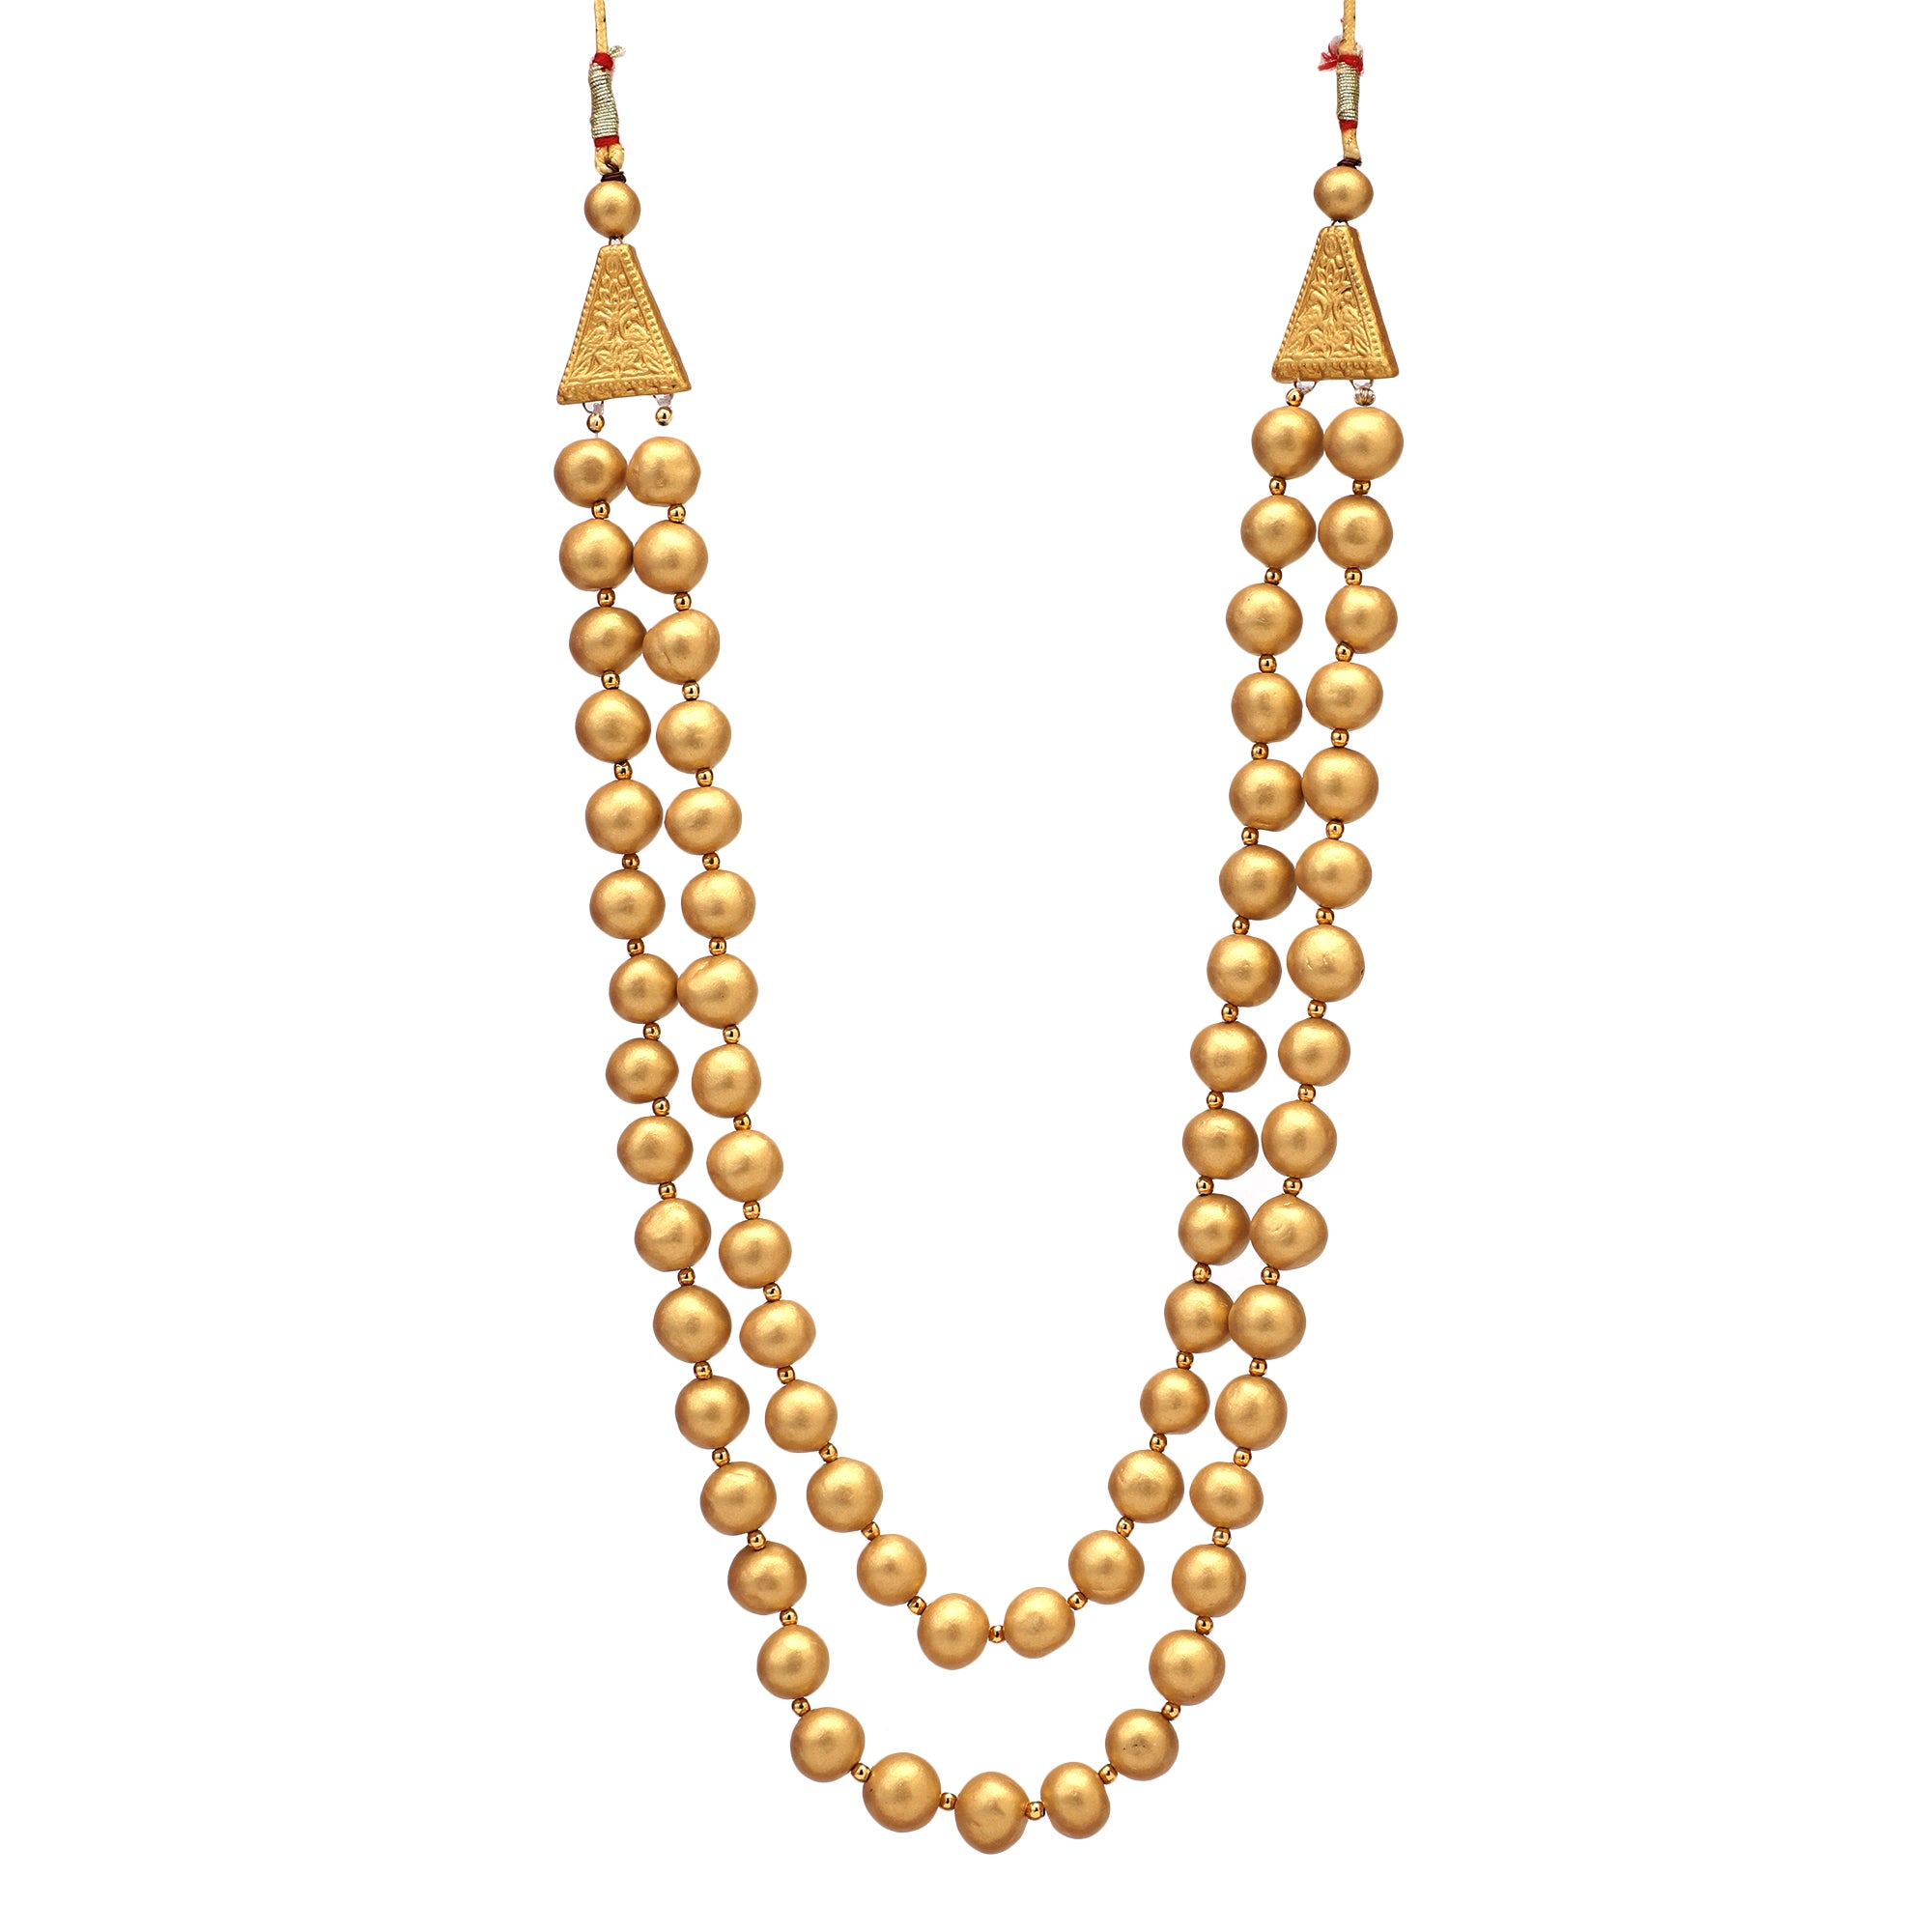 Terracotta Beads Necklace Set in Gold